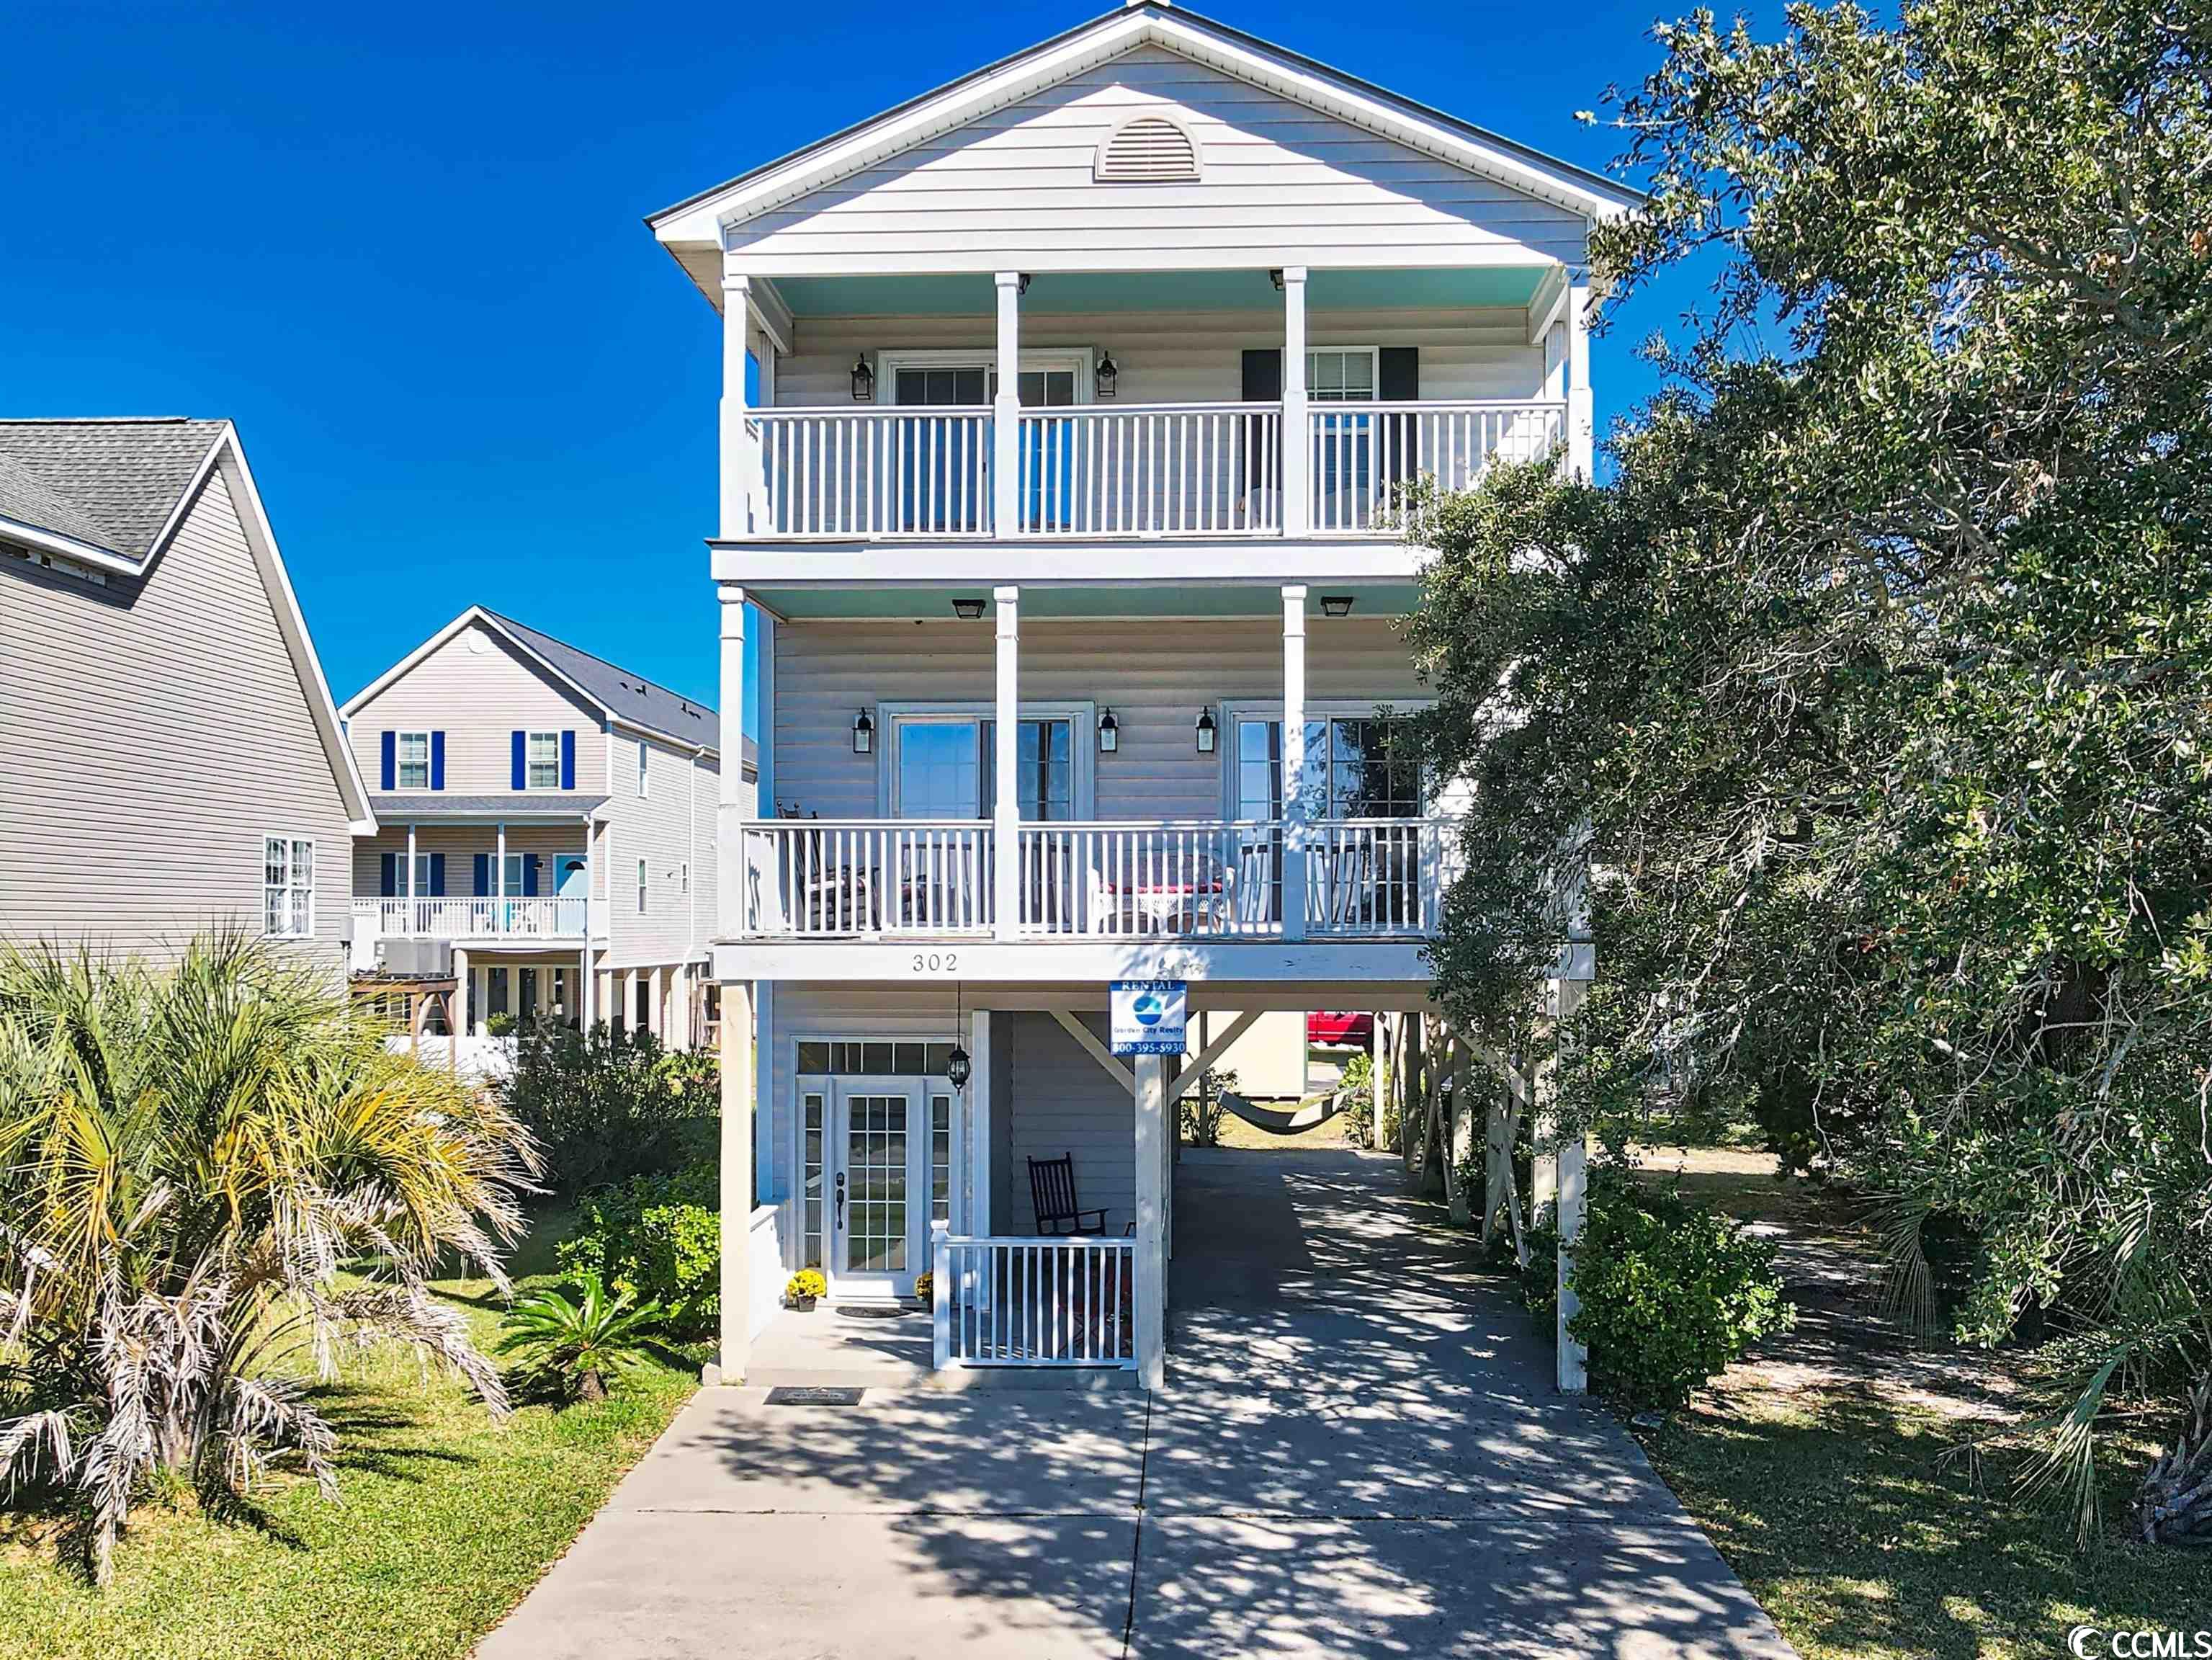 welcome home to 302 seabreeze dr in garden city. sitting directly across from the marsh, this home has amazing & gorgeous views that you will never get tired of seeing! have your morning coffee soaking up the sunrise, and your glass of wine at dusk watching the mesmerizing sunset! this 5 bedroom 4.5 bath raised beach house has double porches off the main living floor & 2nd floor, so you will never miss a sunrise or a sunset. this home offers two owner's suites on each floor. the main living floor has an owner's suite and bath with 2 showers, the half bath, a wet bar, the kitchen which is open to the living room and dining area making it great for entertaining. the 2nd floor has another owner's suite and bath along with the other 3 bedrooms and 2 baths & laundry area. there is an outside storage unit underneath the house for your grill, beach chairs, & other beach items.  being only a few blocks from the ocean, this location is a short walk to the beach or a golfcart ride to sam's corner to grab a world famous hotdog, play arcade games, or go for a walk on the pier.  garden city is just a short ride to the murrells inlet marsh walk for dinner & entertainment. this home is a must see to experience the views of the marsh for yourself!  home is being sold furnished & washer/dryer does convey with property (new washer installed december 2022). ***new train hvac installed july 31, 2023 by air doctor services. warranty will transfer to the new owner!